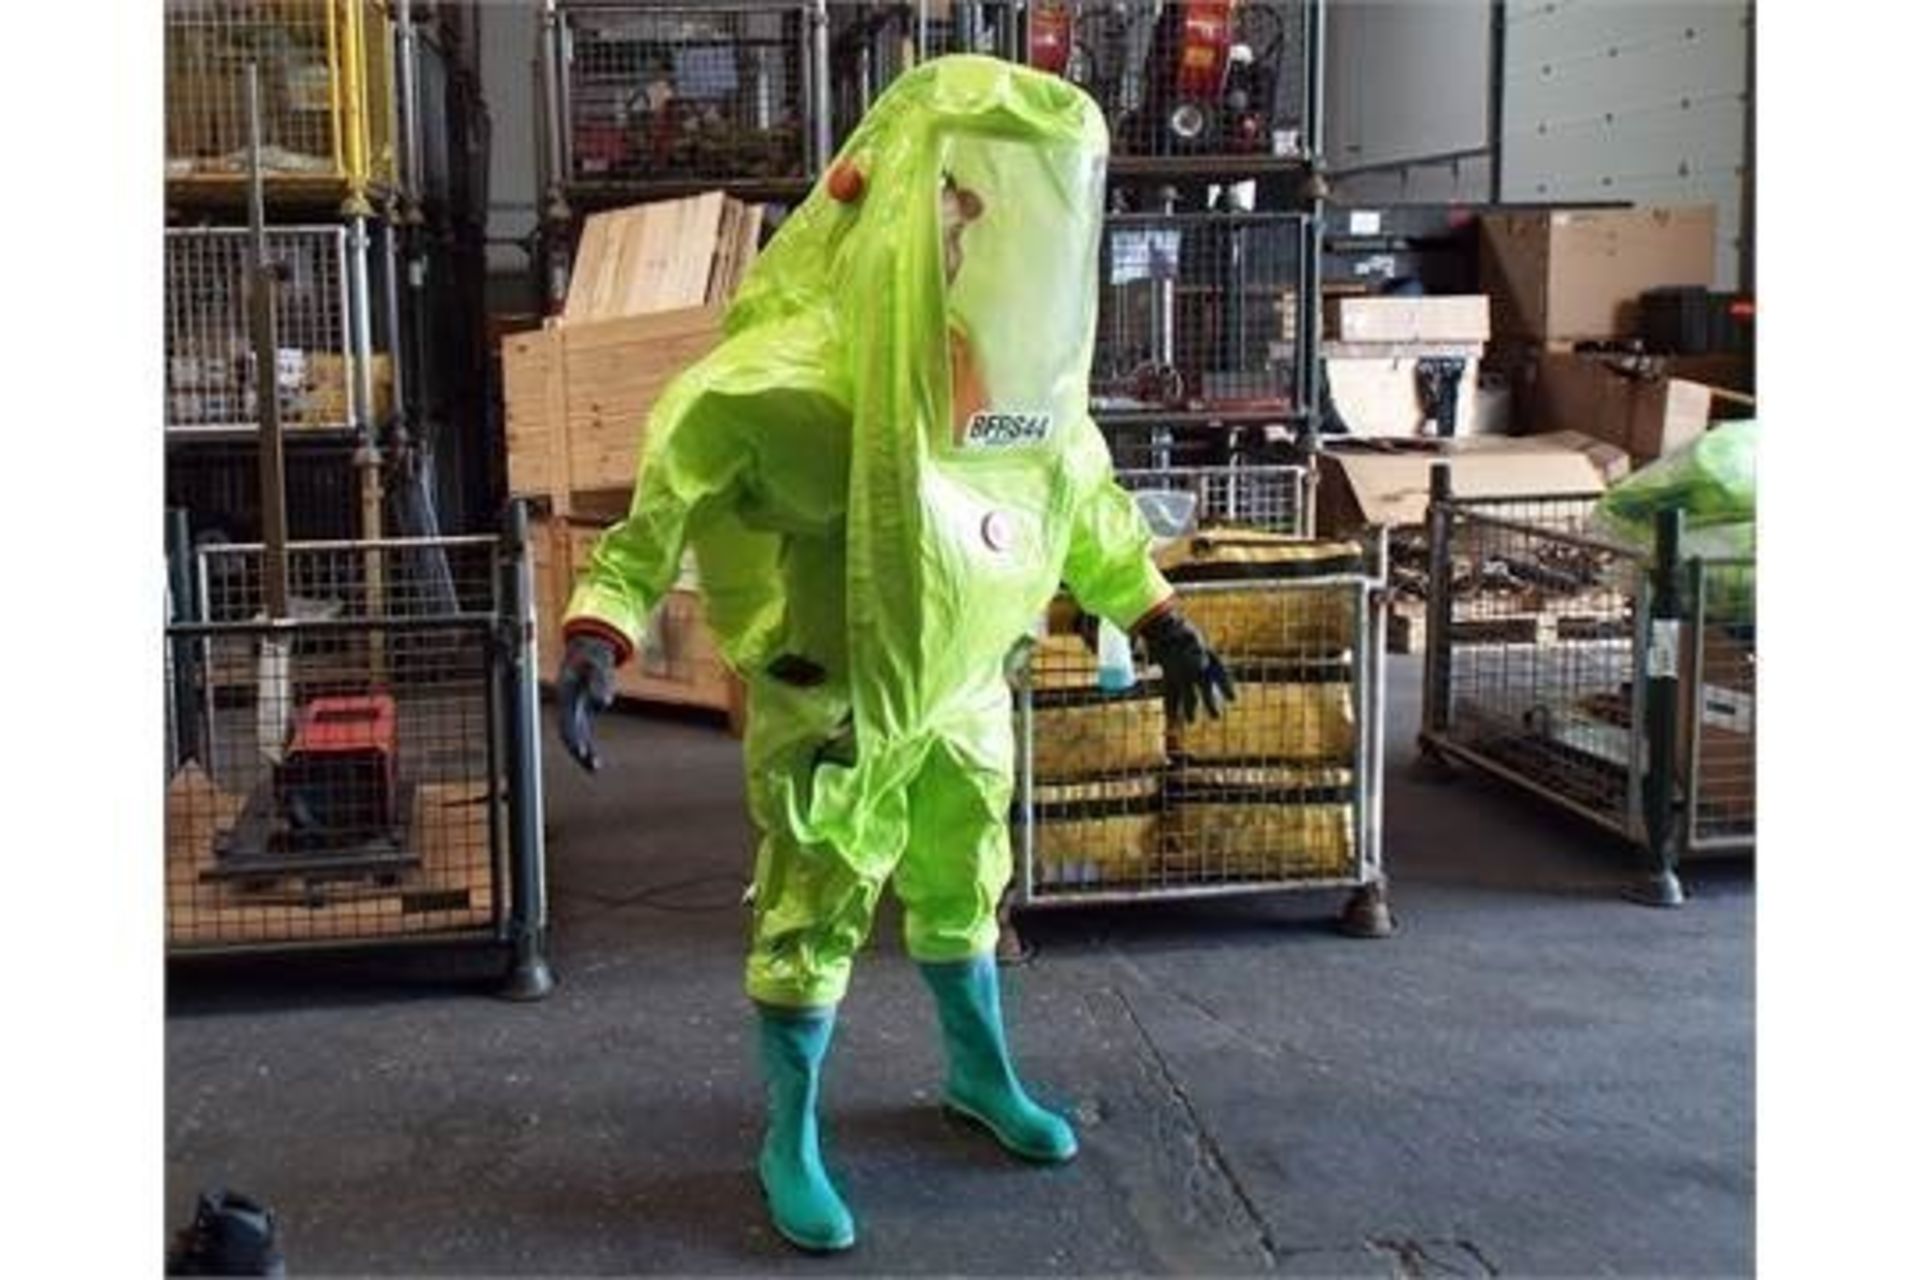 1 x Unissued Respirex Tychem TK Gas-Tight Hazmat Suit Type 1A with Attached Boots and Gloves. Medium